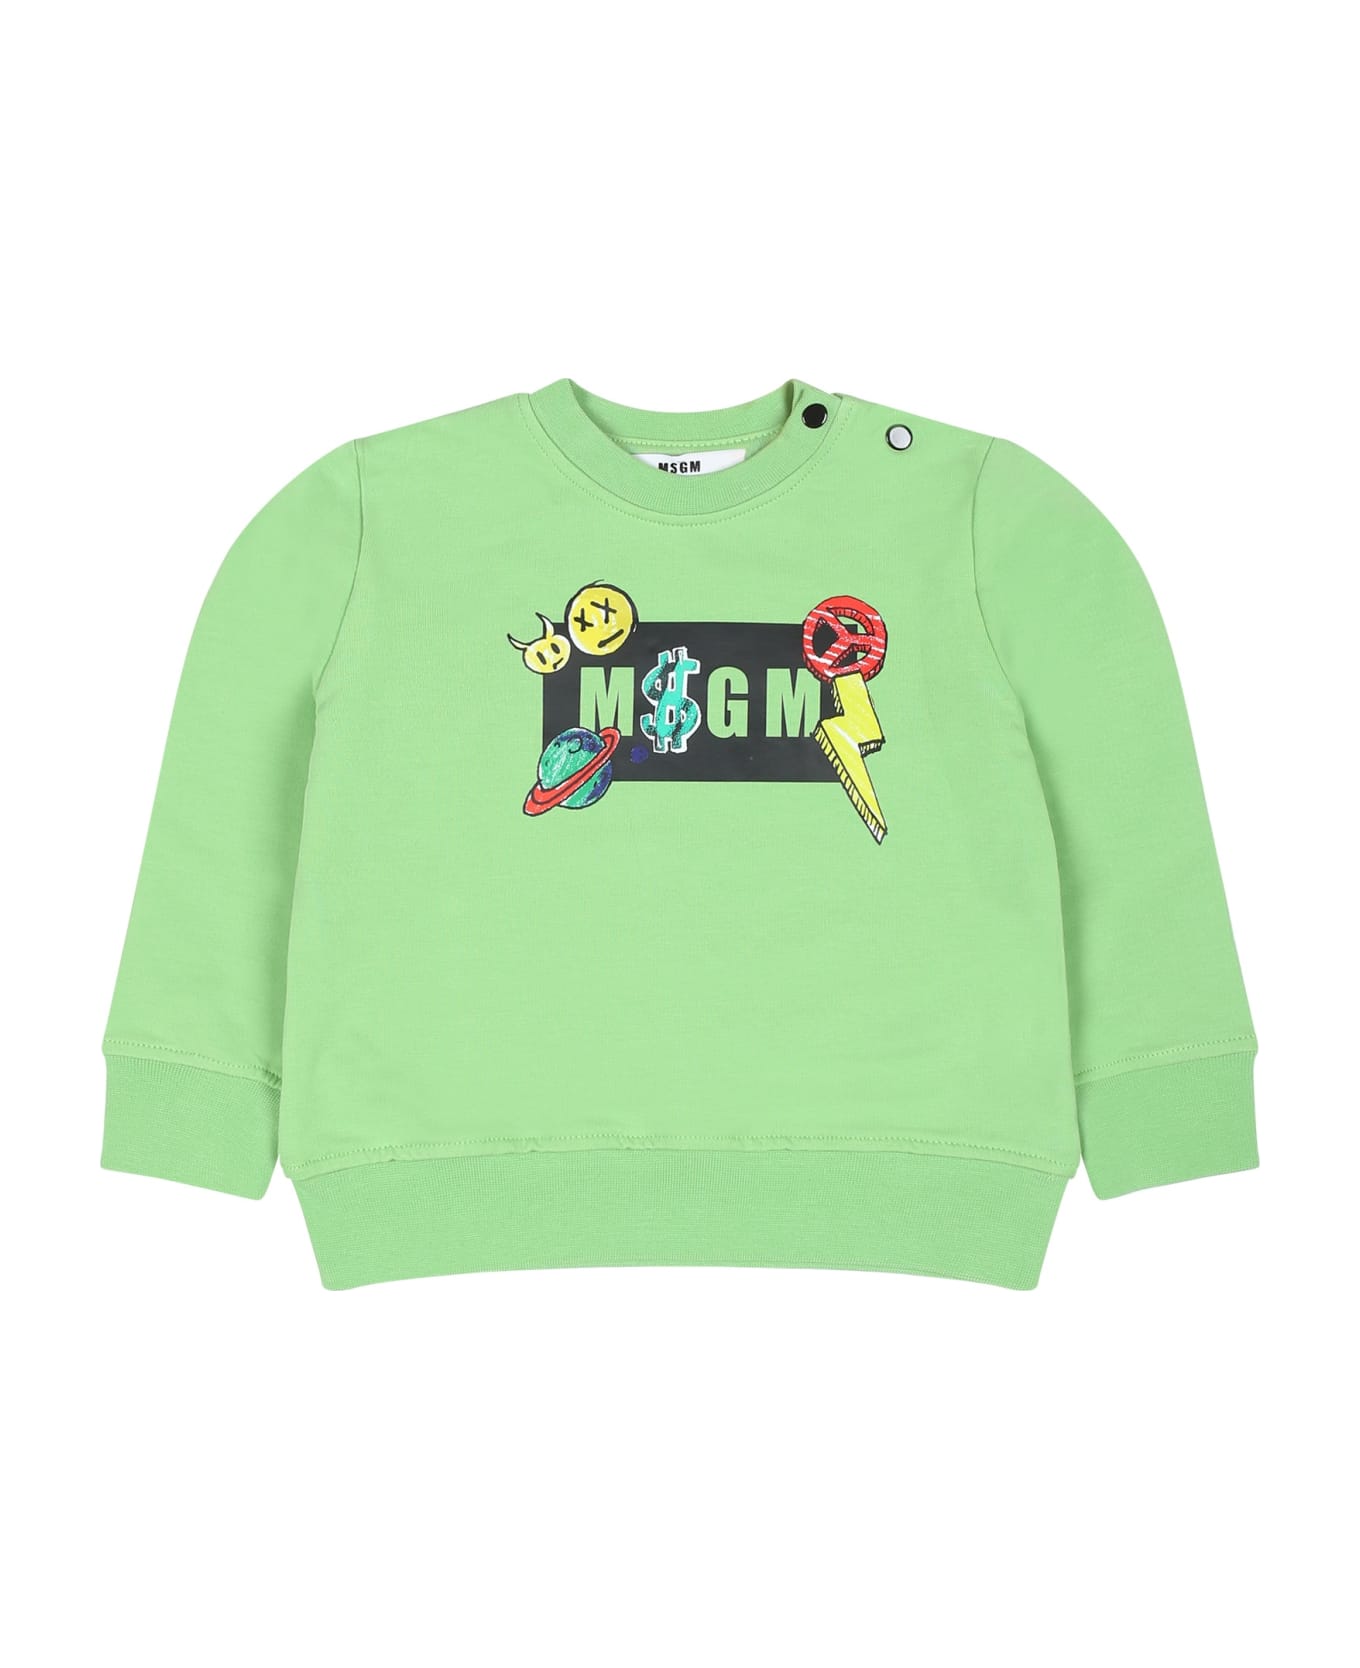 MSGM Green Sweatshirt For Baby Boy With Logo And Print - Green